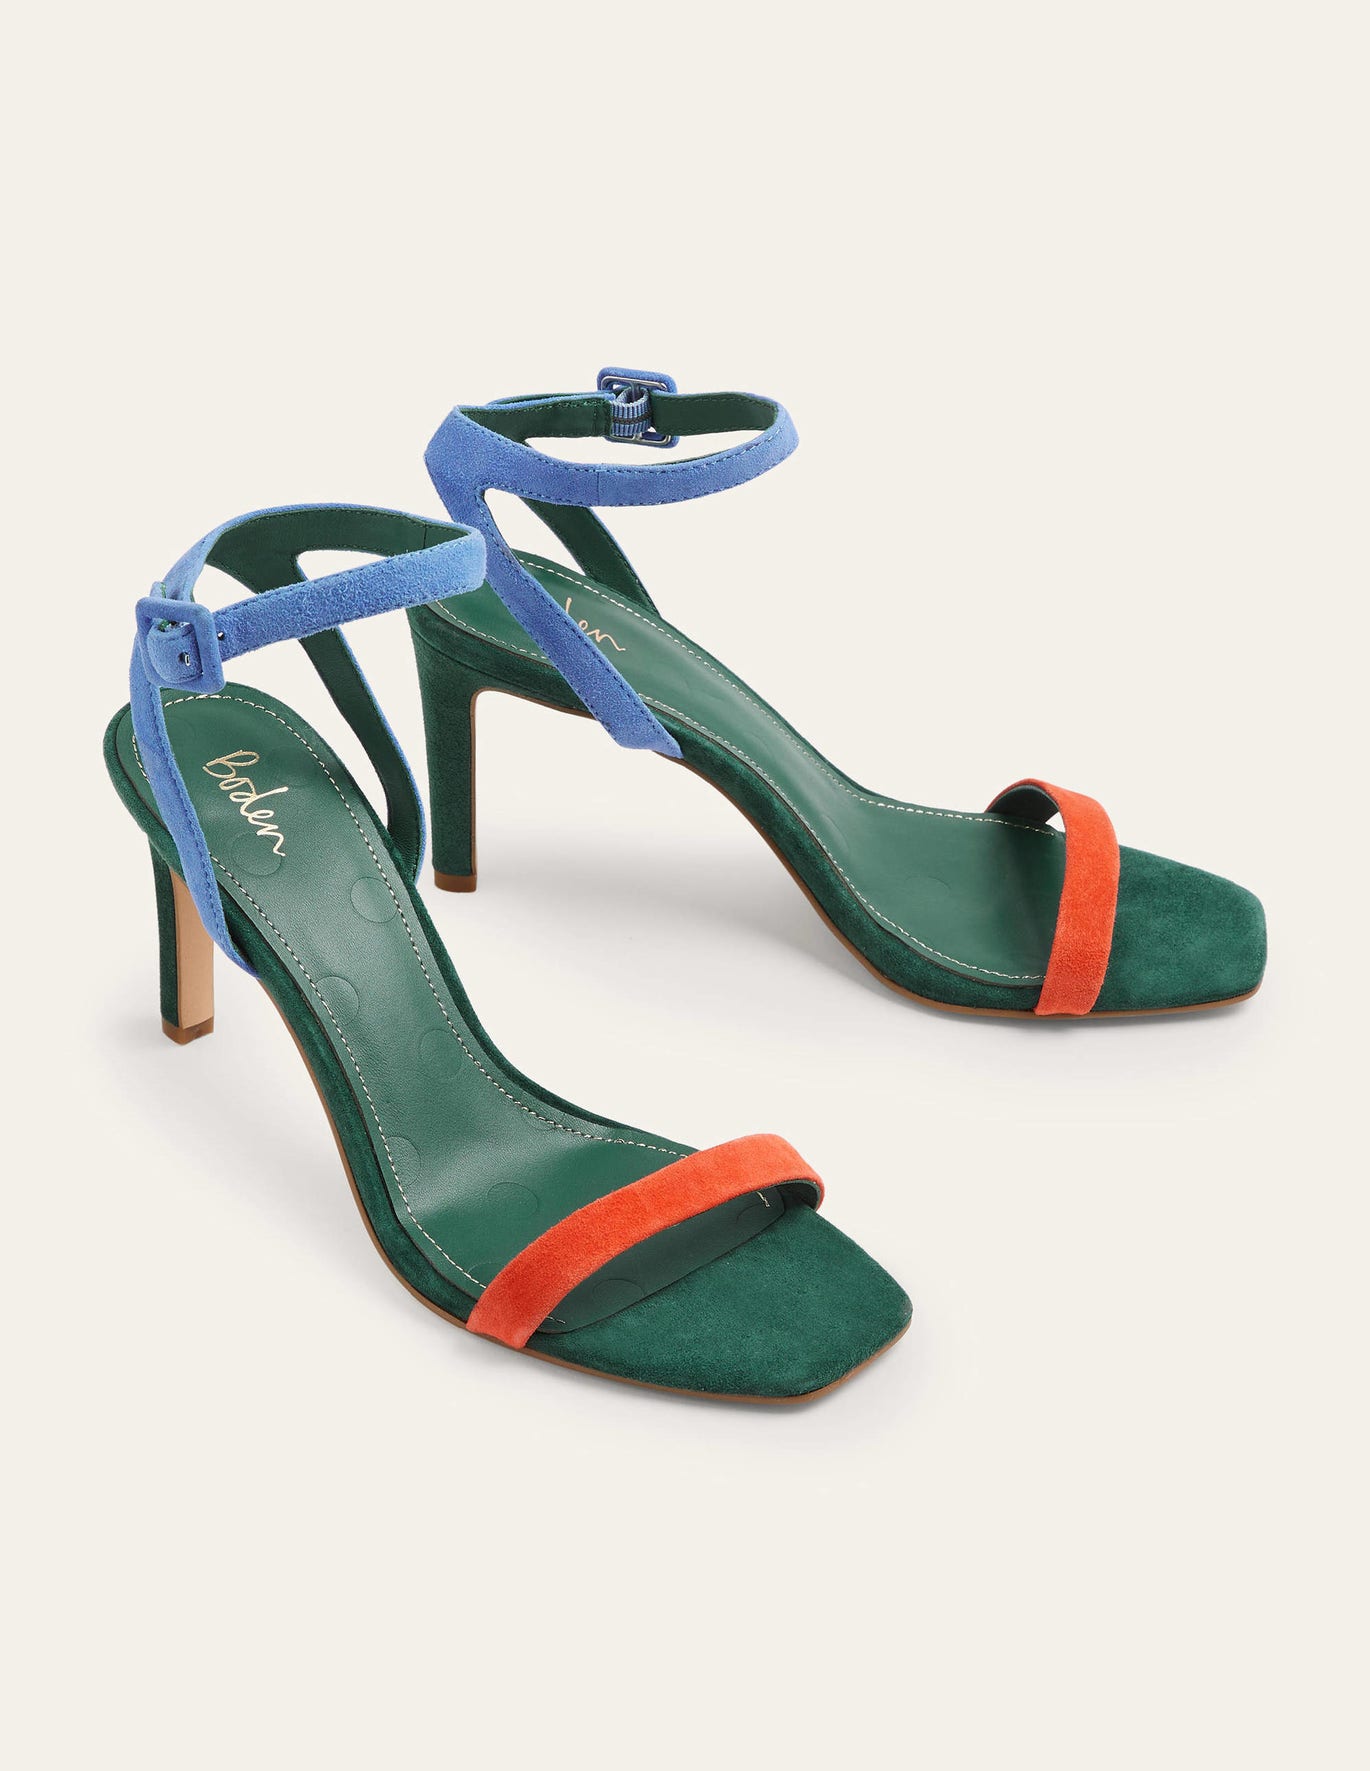 Boden Strappy Heeled Sandals - Colourblock